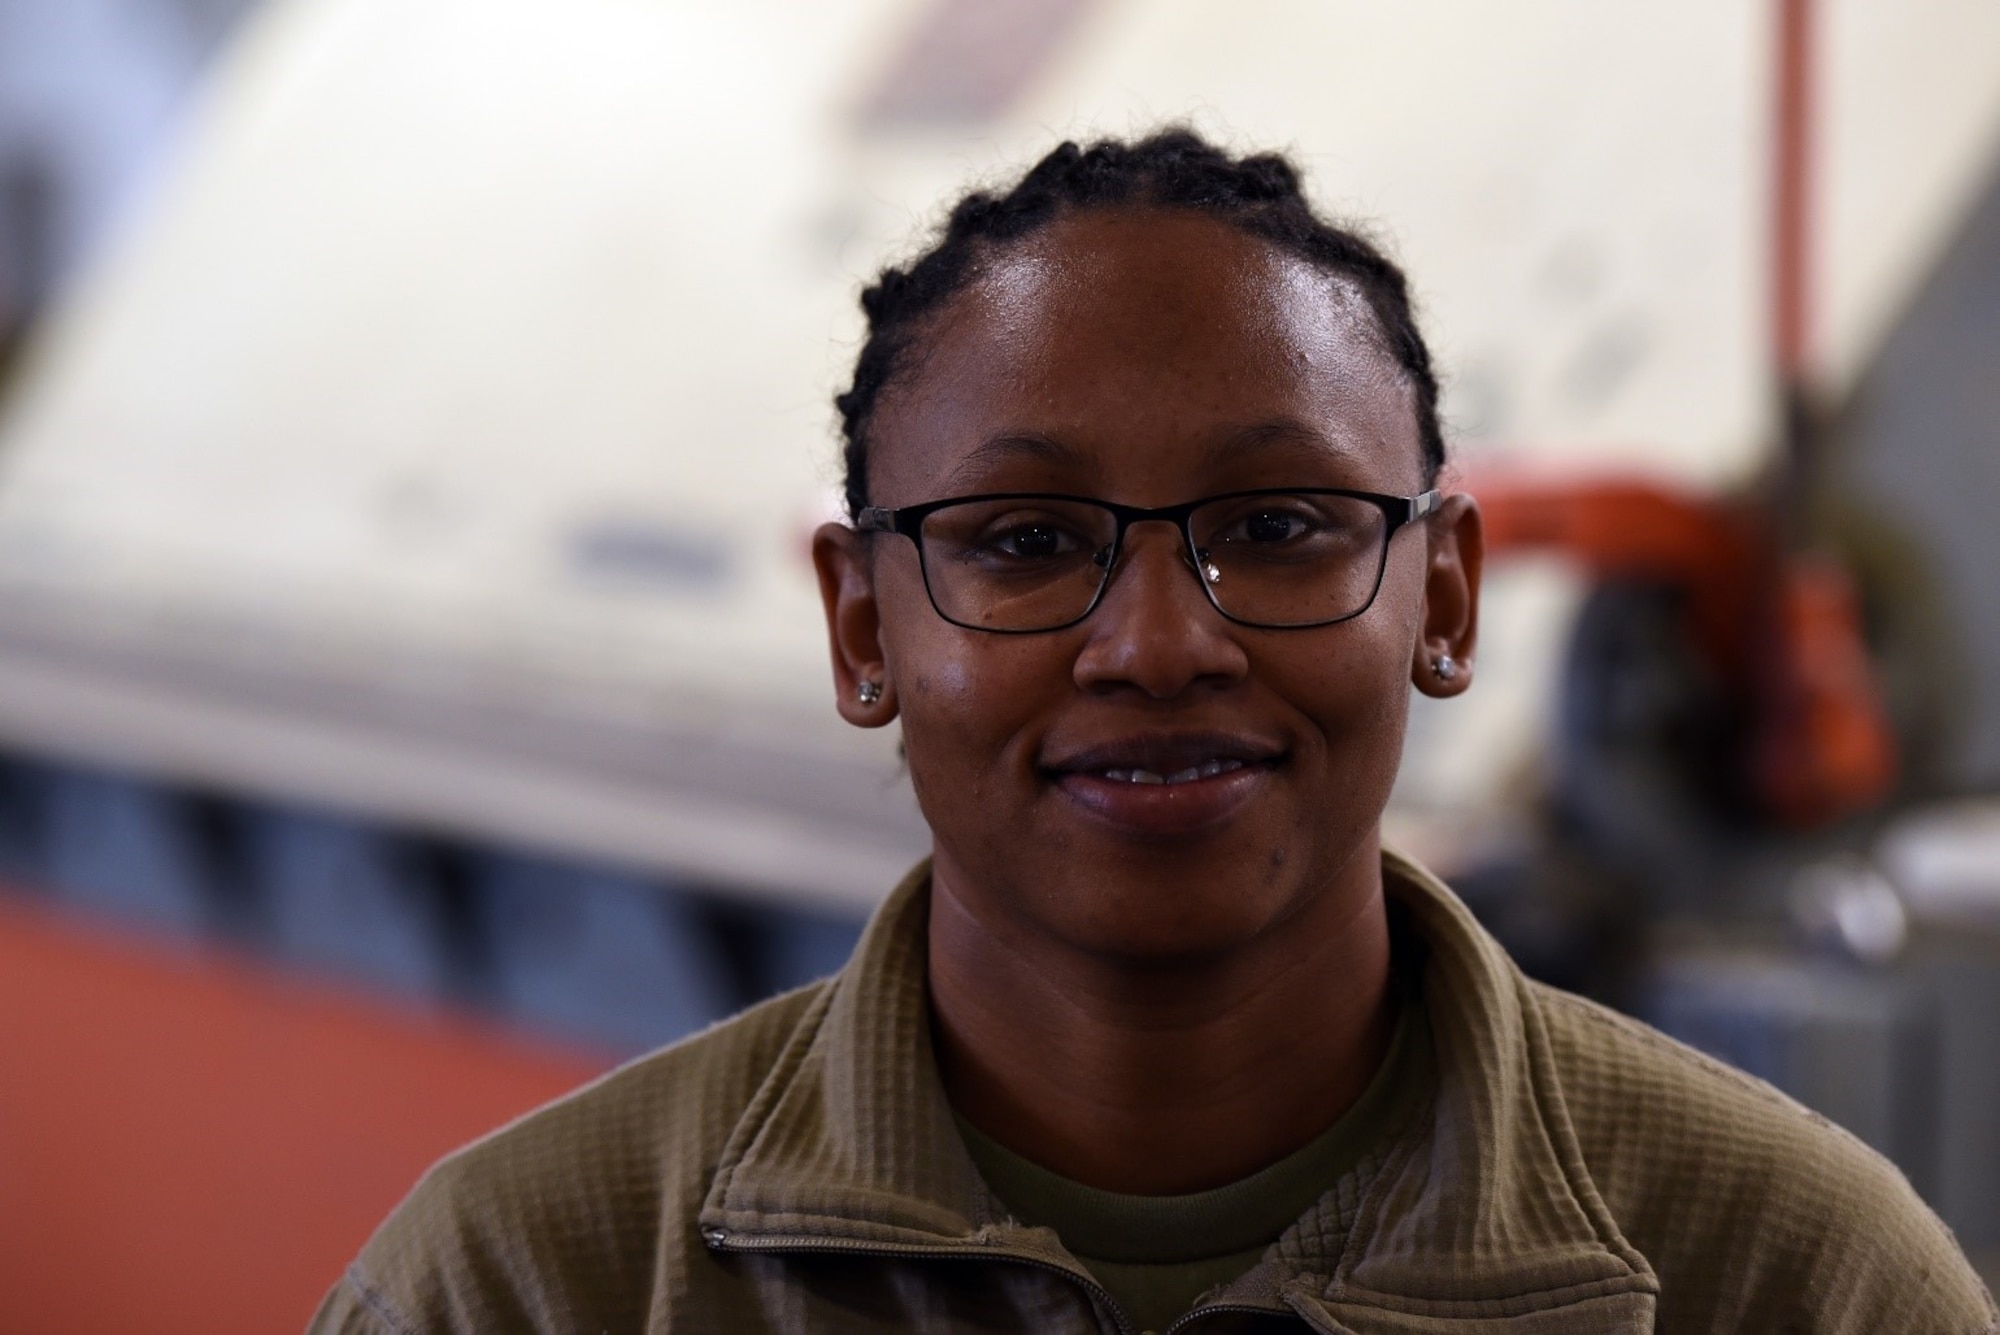 U.S. Air Force Staff Sgt. Jerika-Deandra Thomas, 627th Civil Engineer Squadron structural journeyman, poses for a photo May 20, 2021, at Joint Base Lewis-McChord, Washington. Since joining the ranks of the Air Force five years ago, Thomas has demonstrated her deep understanding of the Air Force core values by receiving the John Levitow Award, rescuing individuals involved in a dangerous car crash, working toward a degree in criminal justice, and becoming a mentor for high school students. (U.S. Air Force photo by Senior Airman Zoe Thacker)